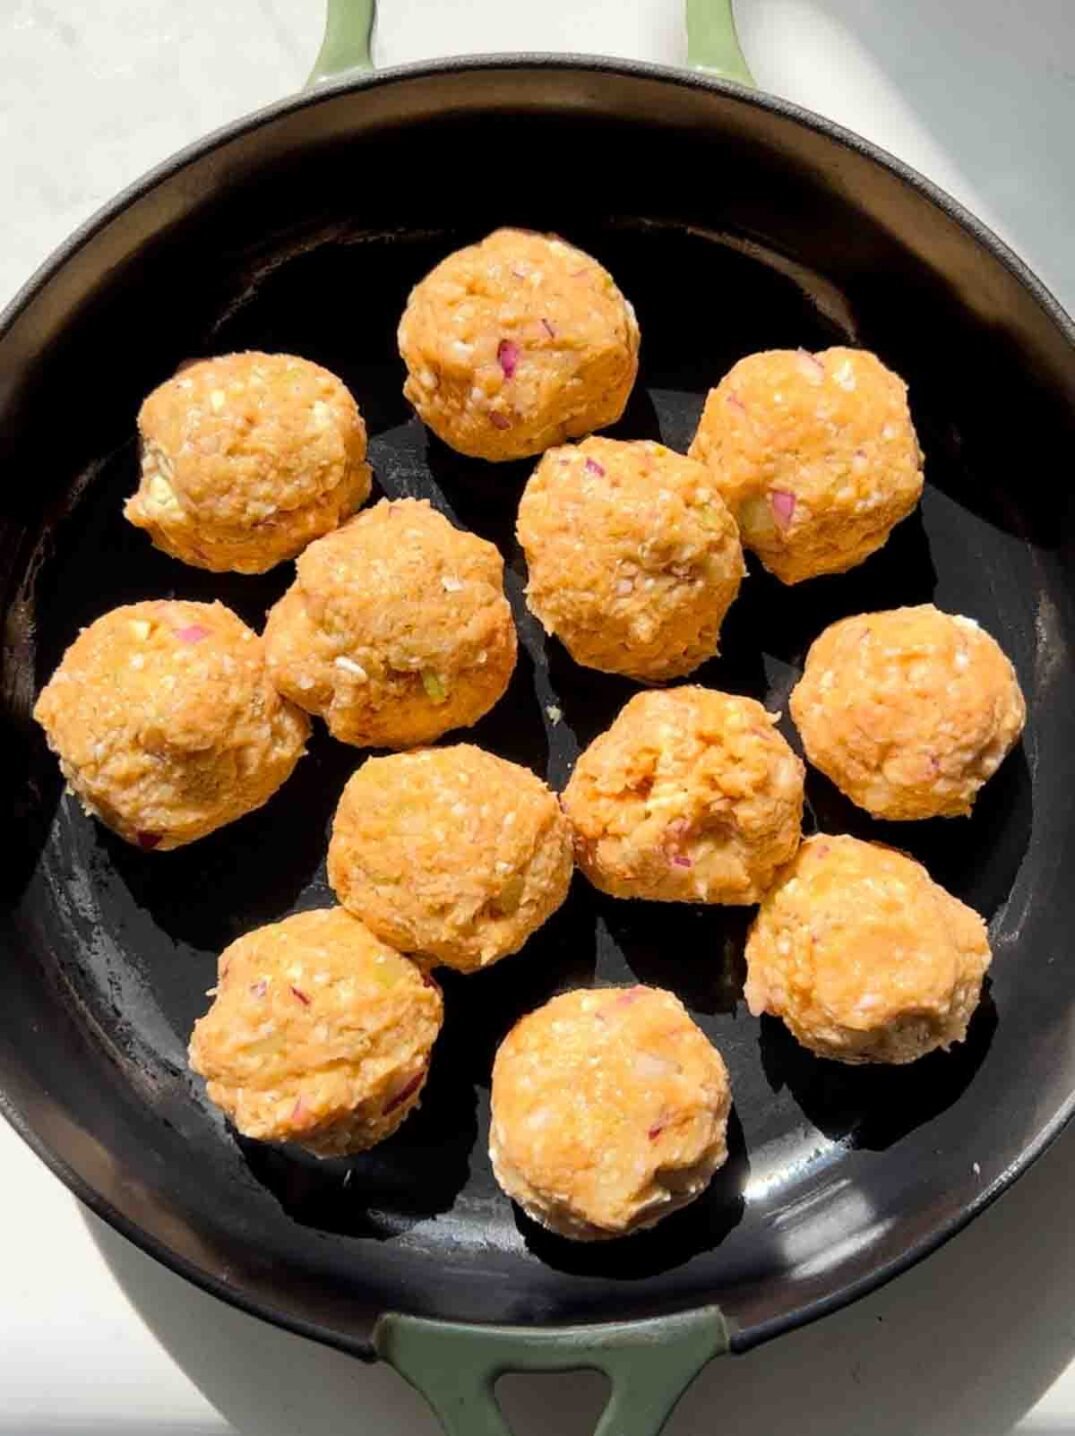 uncooked ground chicken meatballs in a green cast iron skillet.